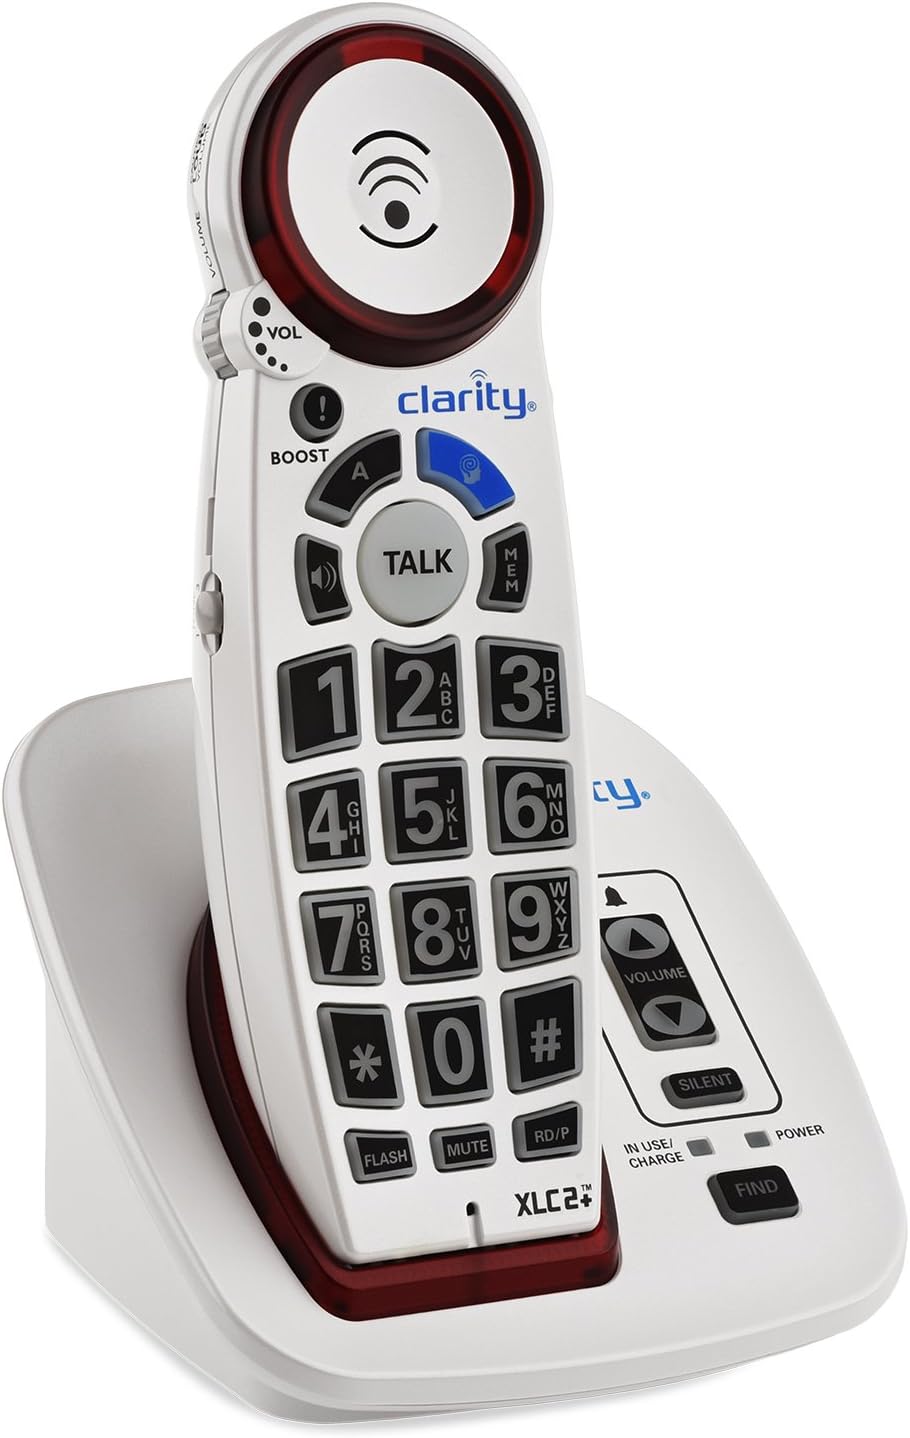 CLARITY XLC2PLUS AMPLIFIED (50+dB) INCOMING & OUTGOING (15dB) TALKING CALLER ID SPEAKERPHONE